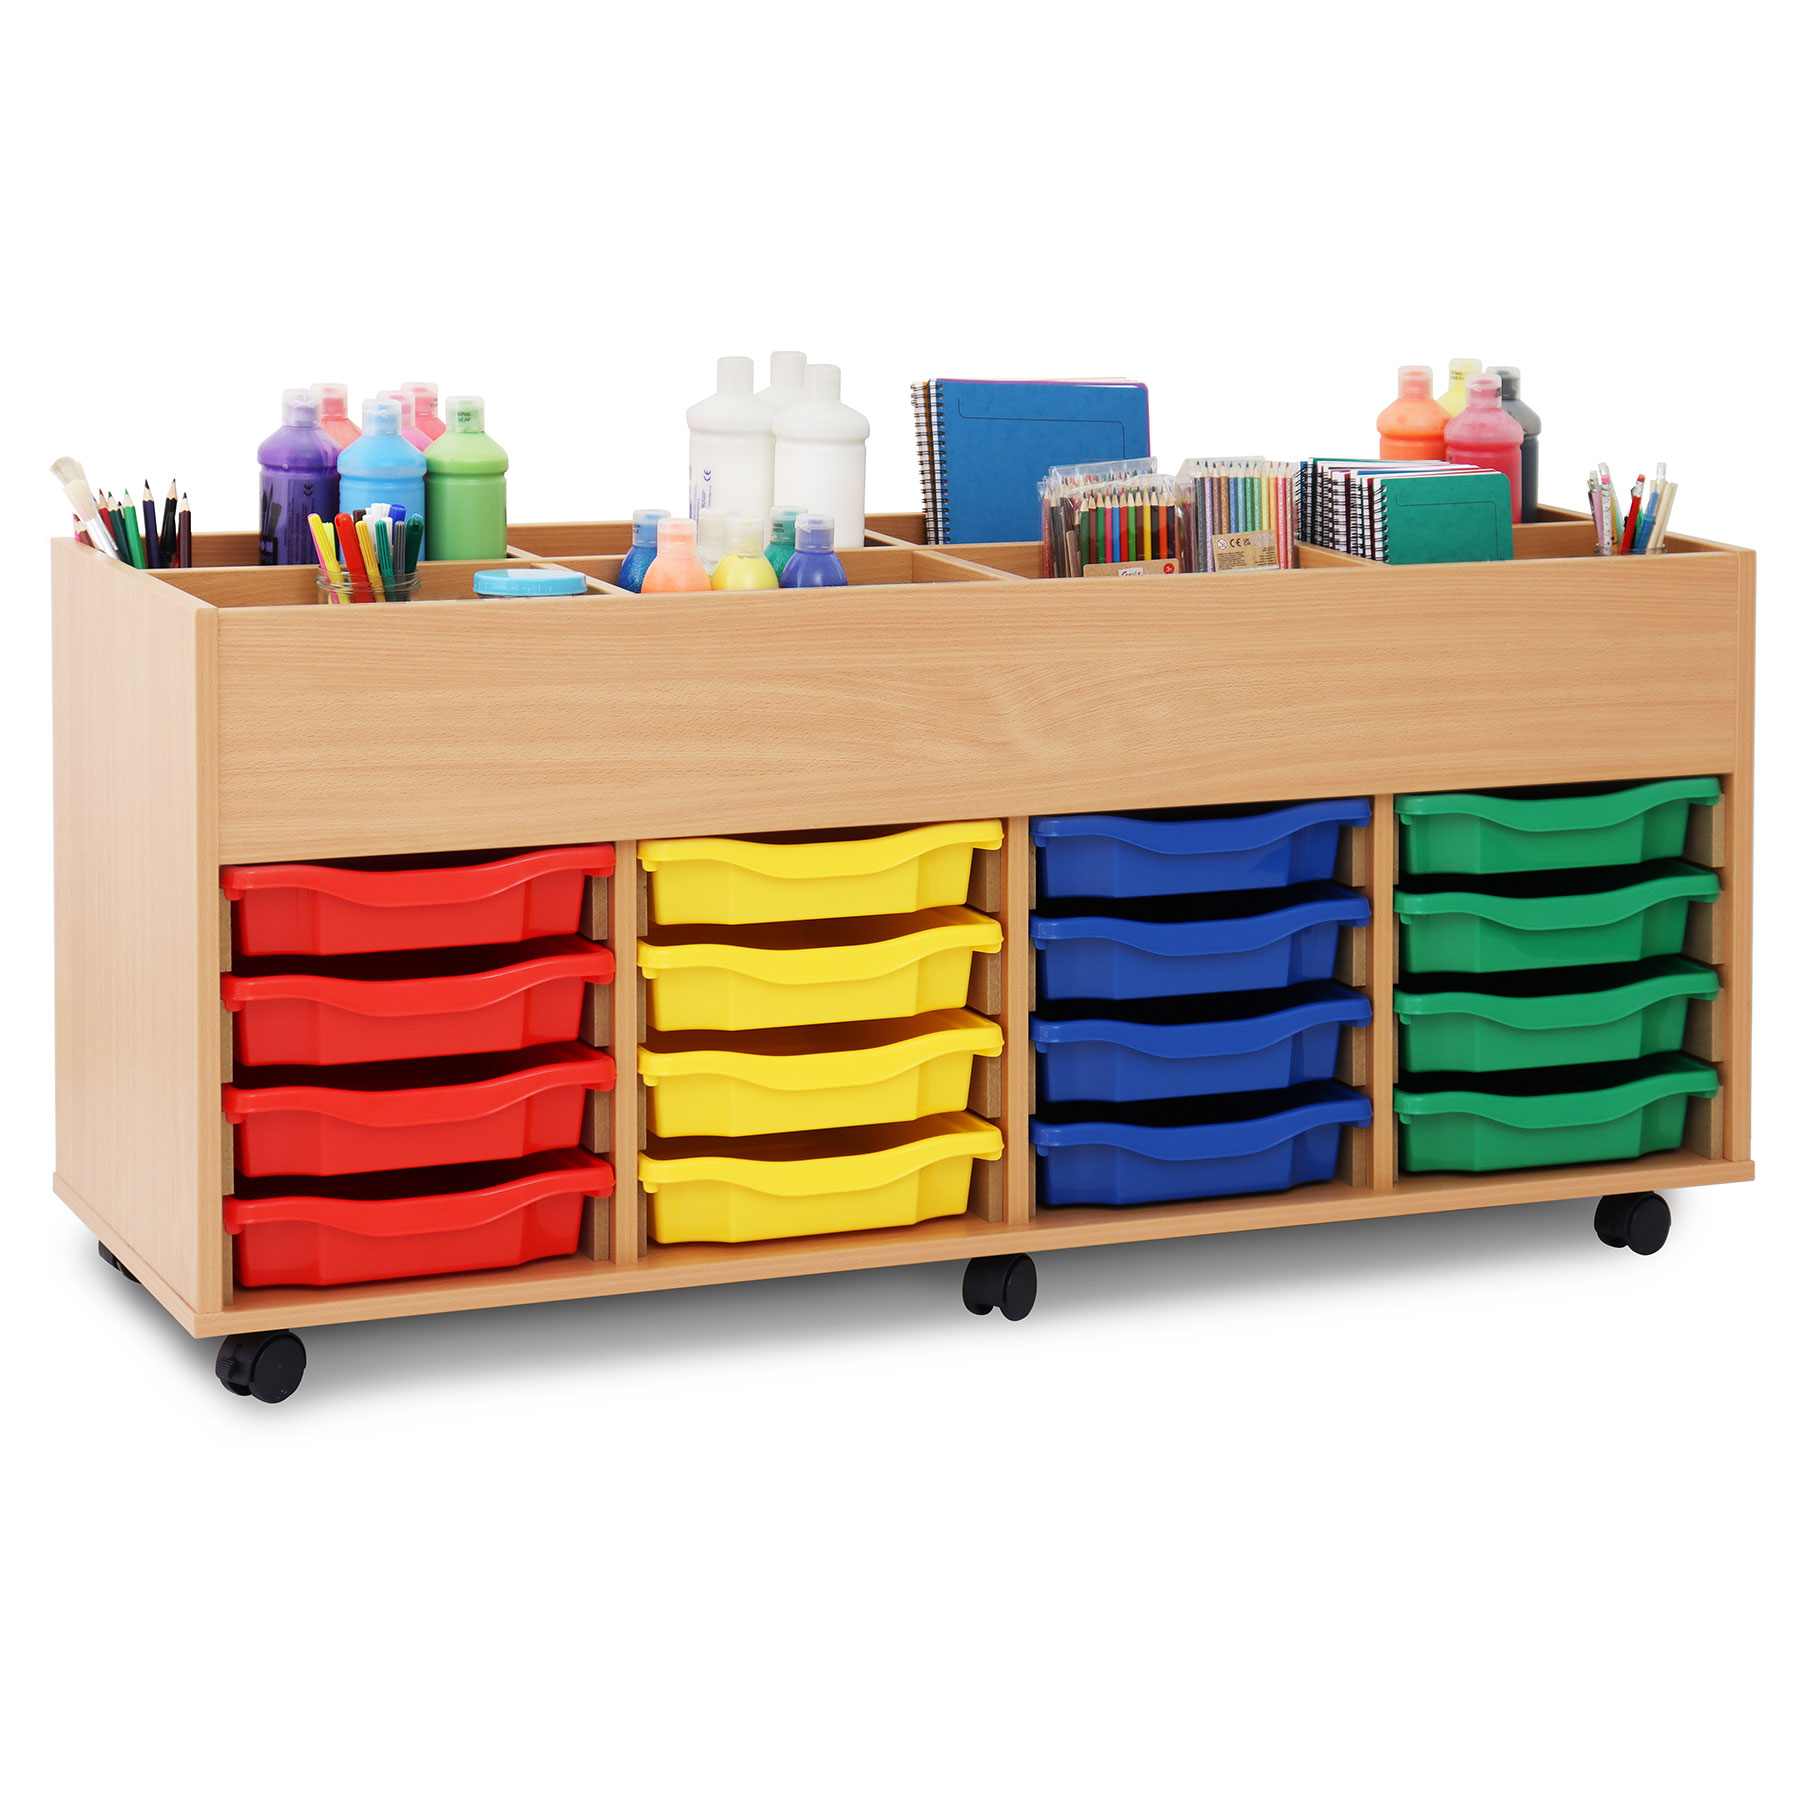 Monarch 8 Bay Mobile Kinderbox with 16 Single Tray Storage